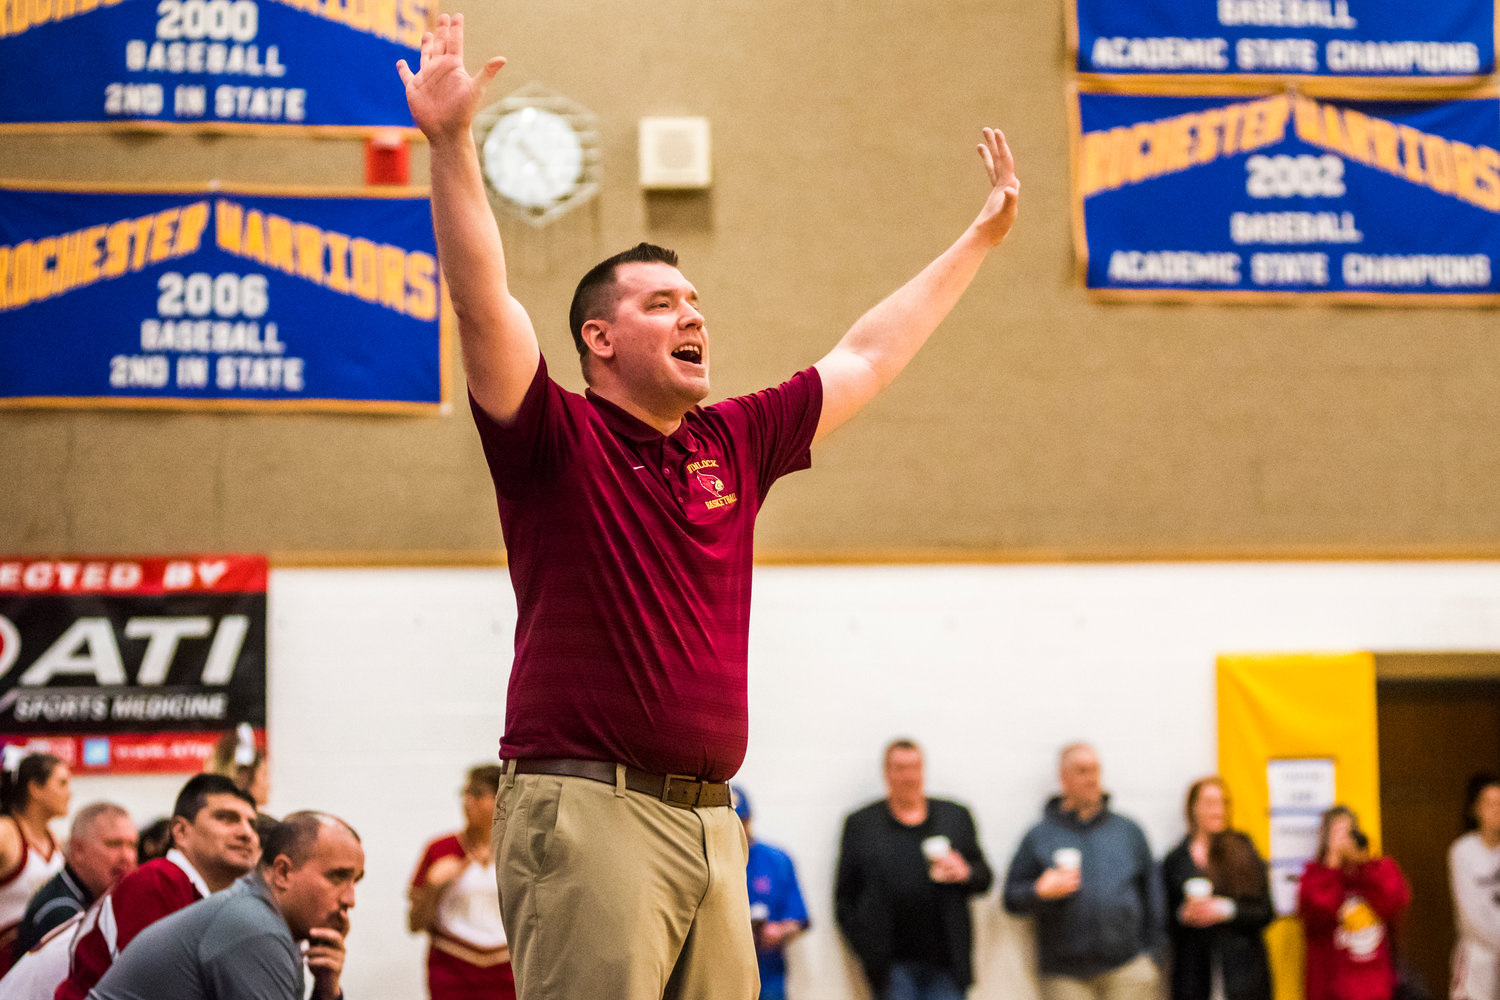 Winlock's coach Nick Bamer during a game against Northwest Christian Saturday night in Rochester.